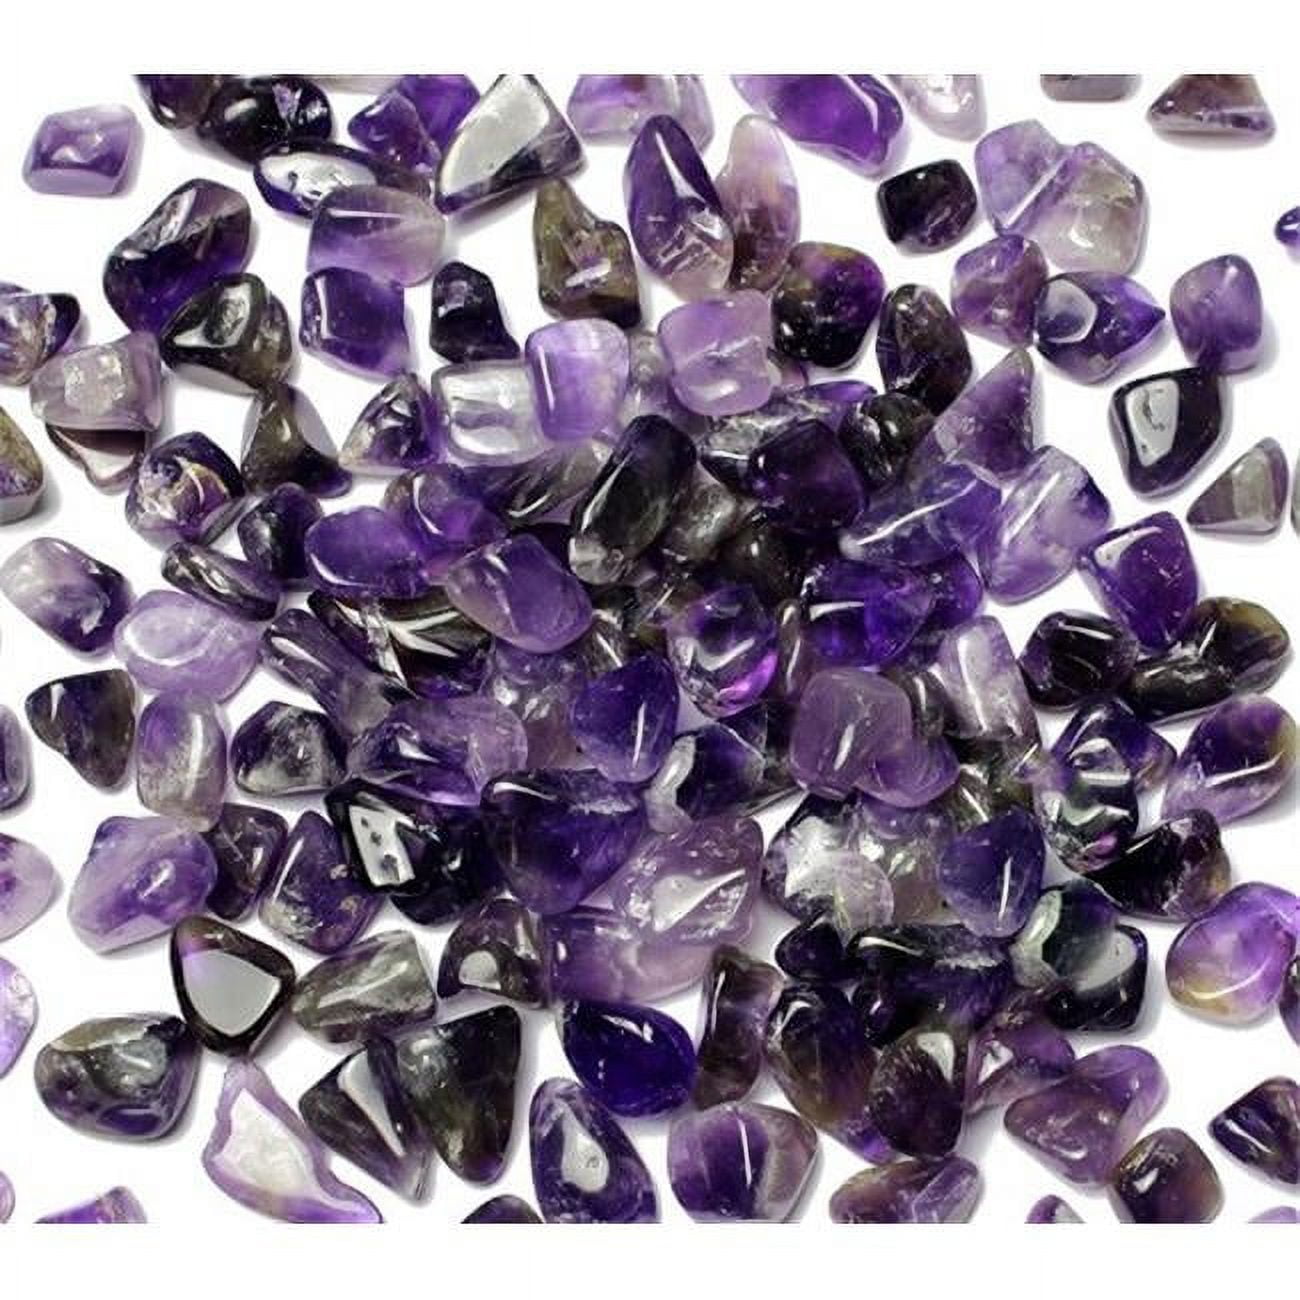 Picture of AZ Trading & Import RK460AME 1 lbs Amethyst Tumbled Chips Stone